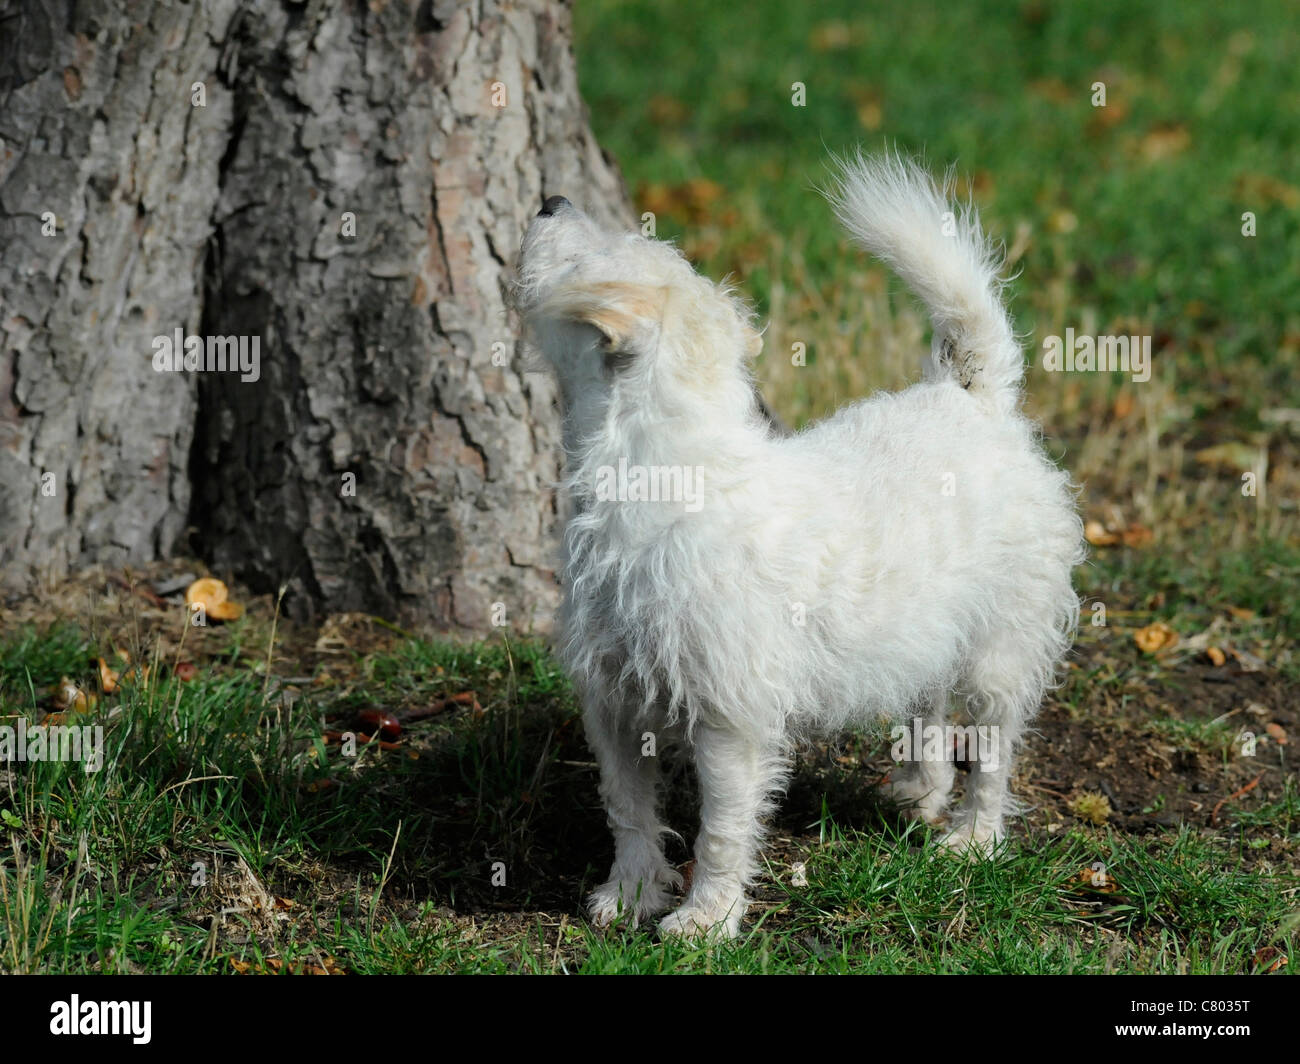 A small old white dog looking up into a tree for squirrels Stock Photo